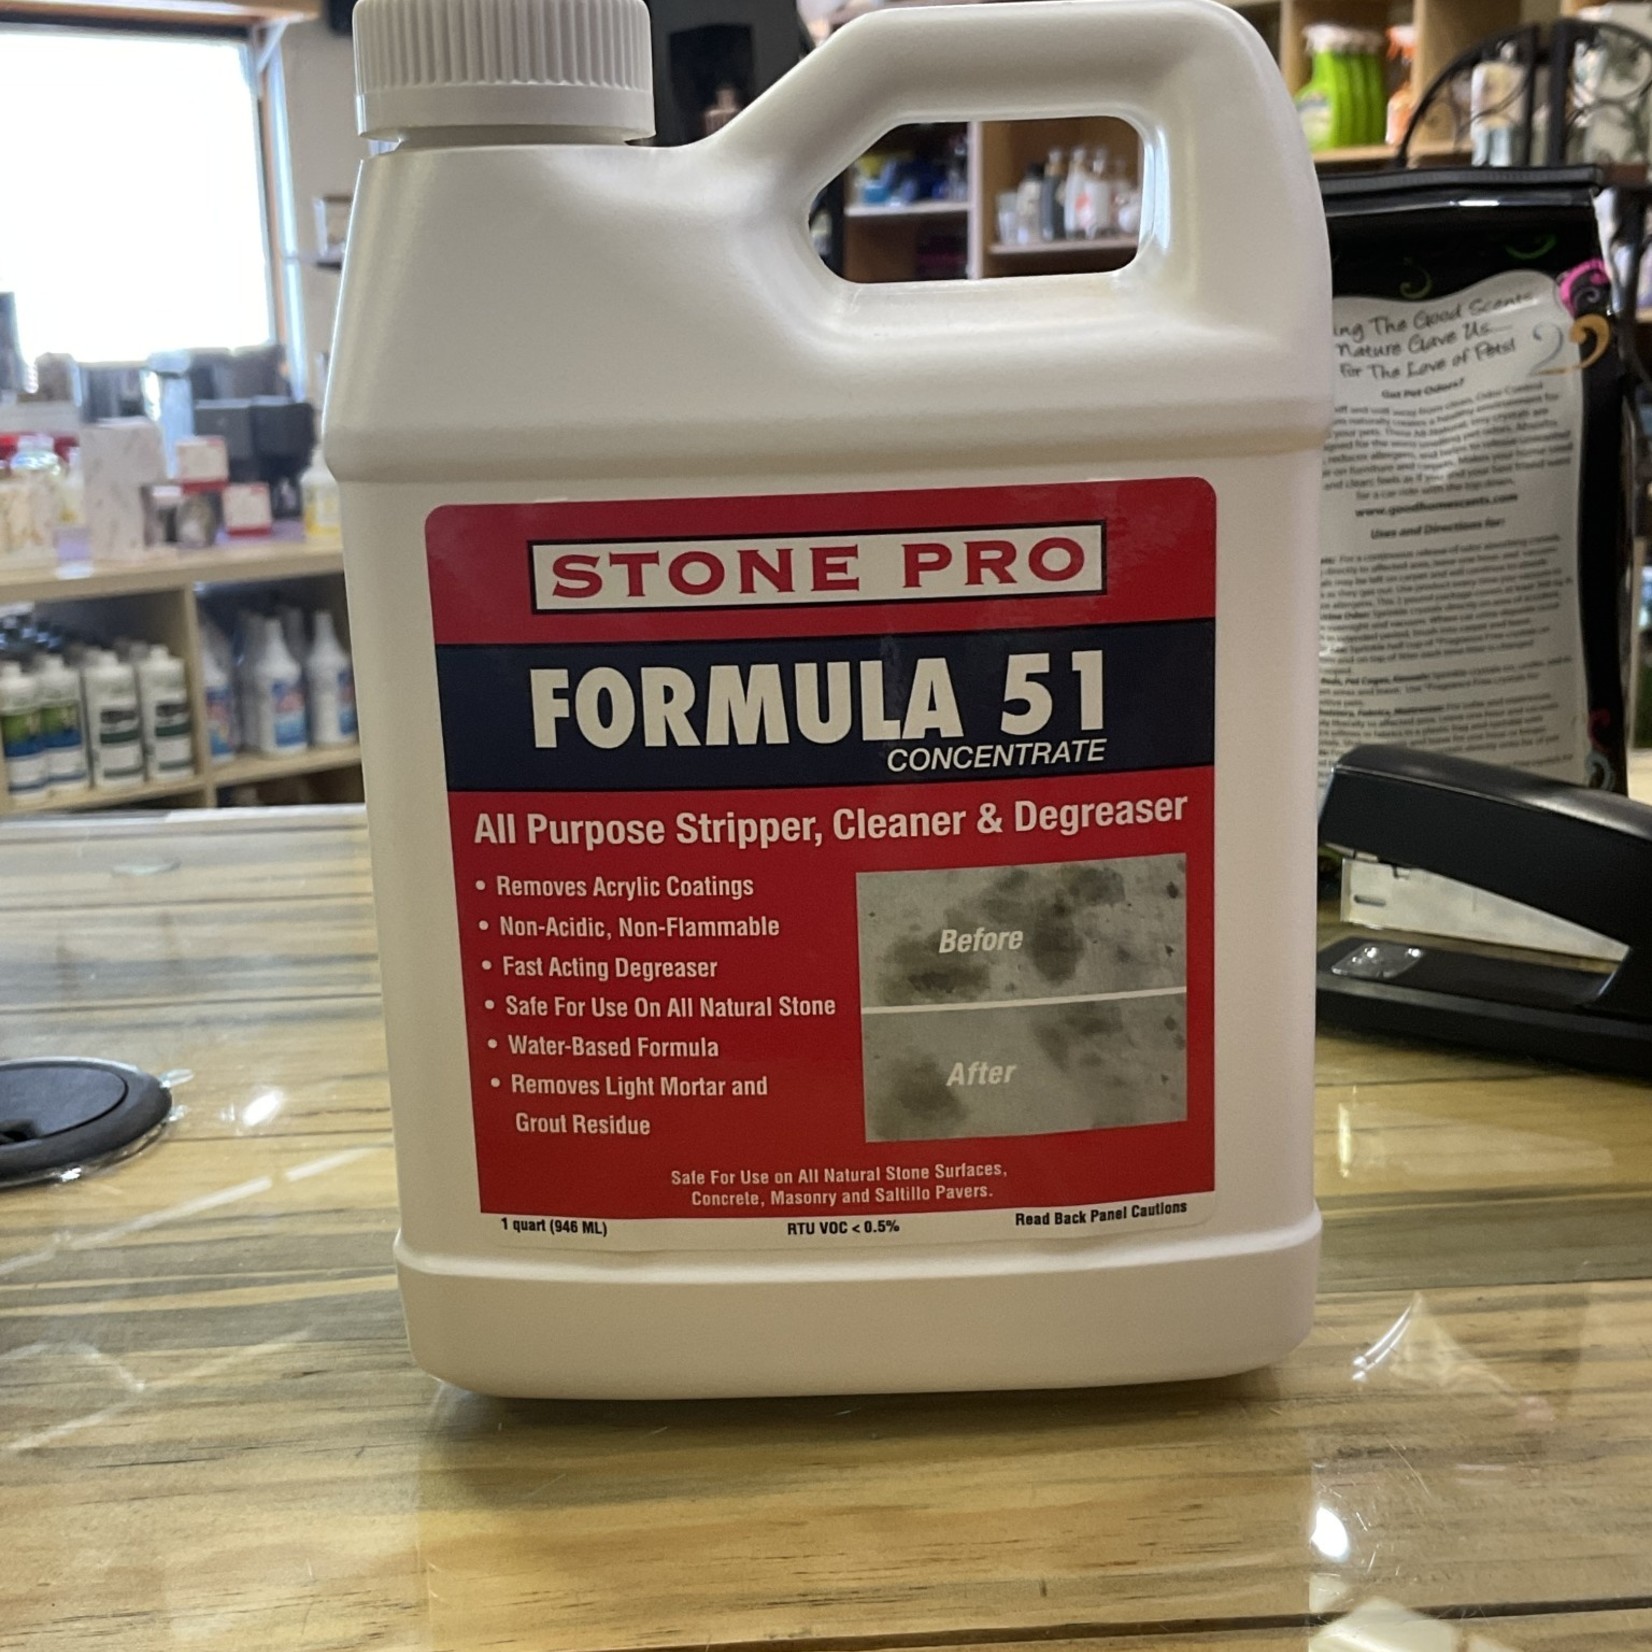 Stone Pro Formula 51 Concentrate All Purpose Stripper, Cleaner & Degreaser 1 Quart